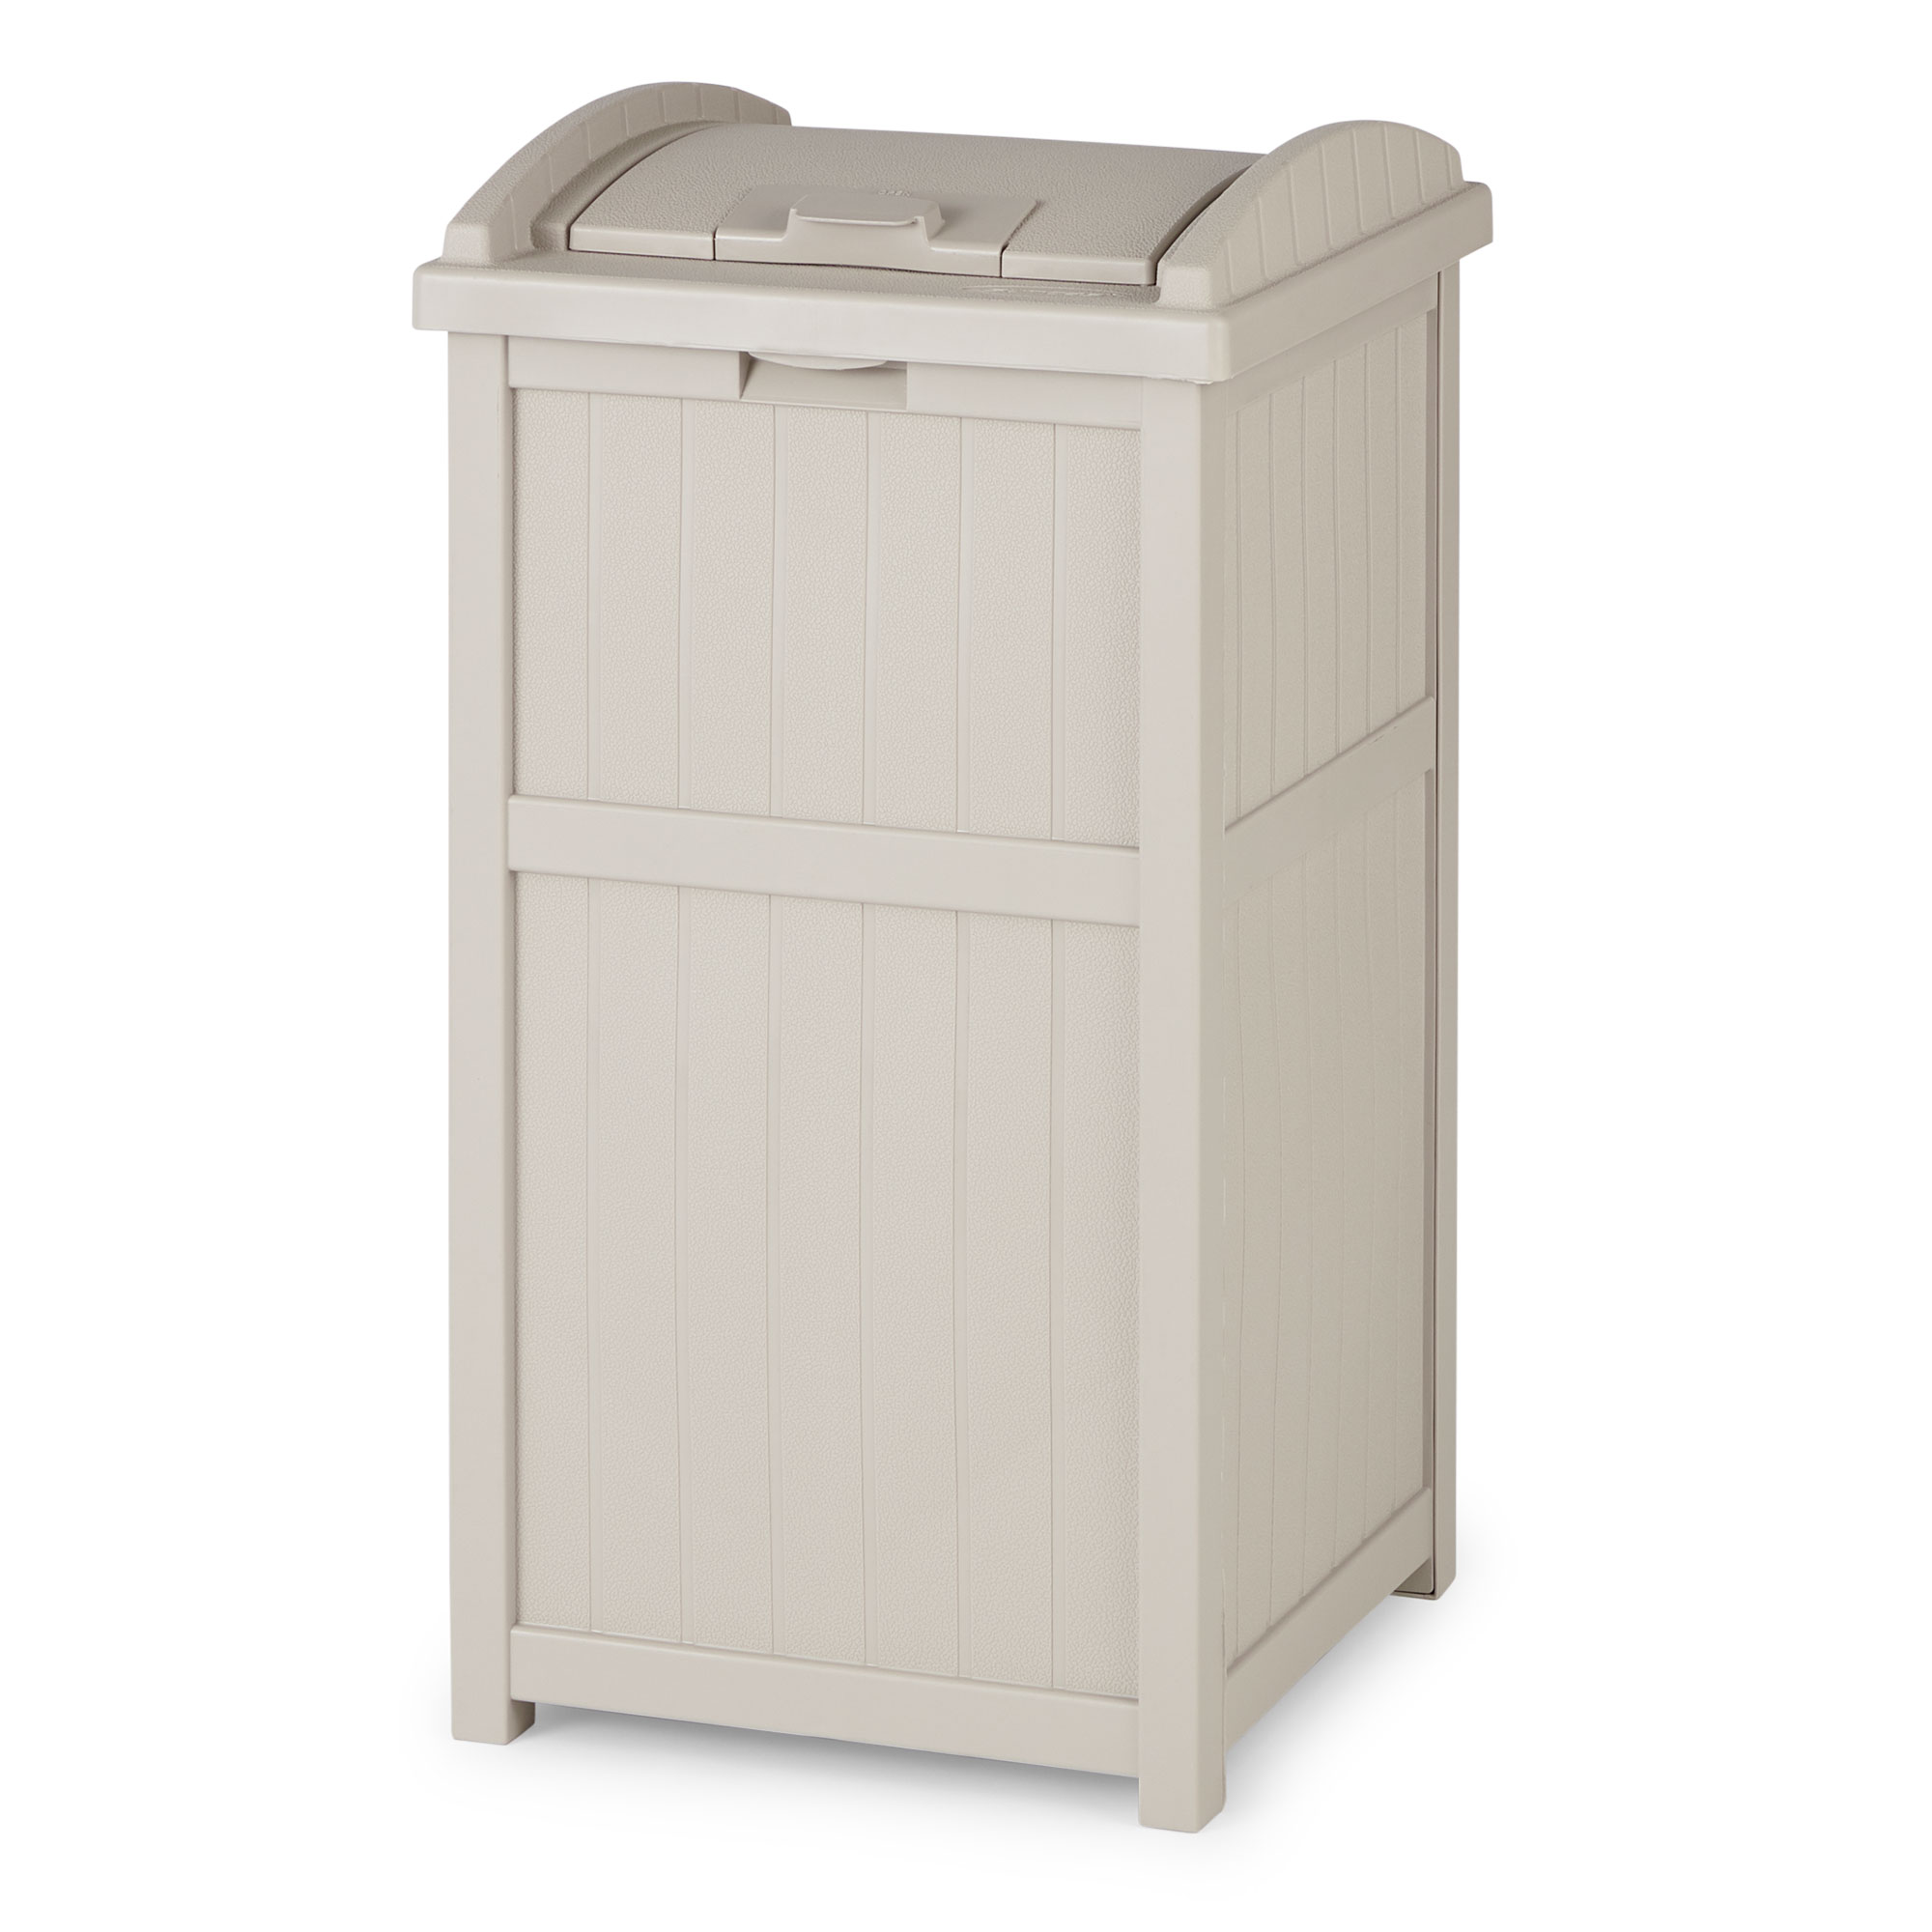 Suncast Outdoor Hideaway Trash Container for Patio, Taupe, 33 Gallon - image 1 of 3